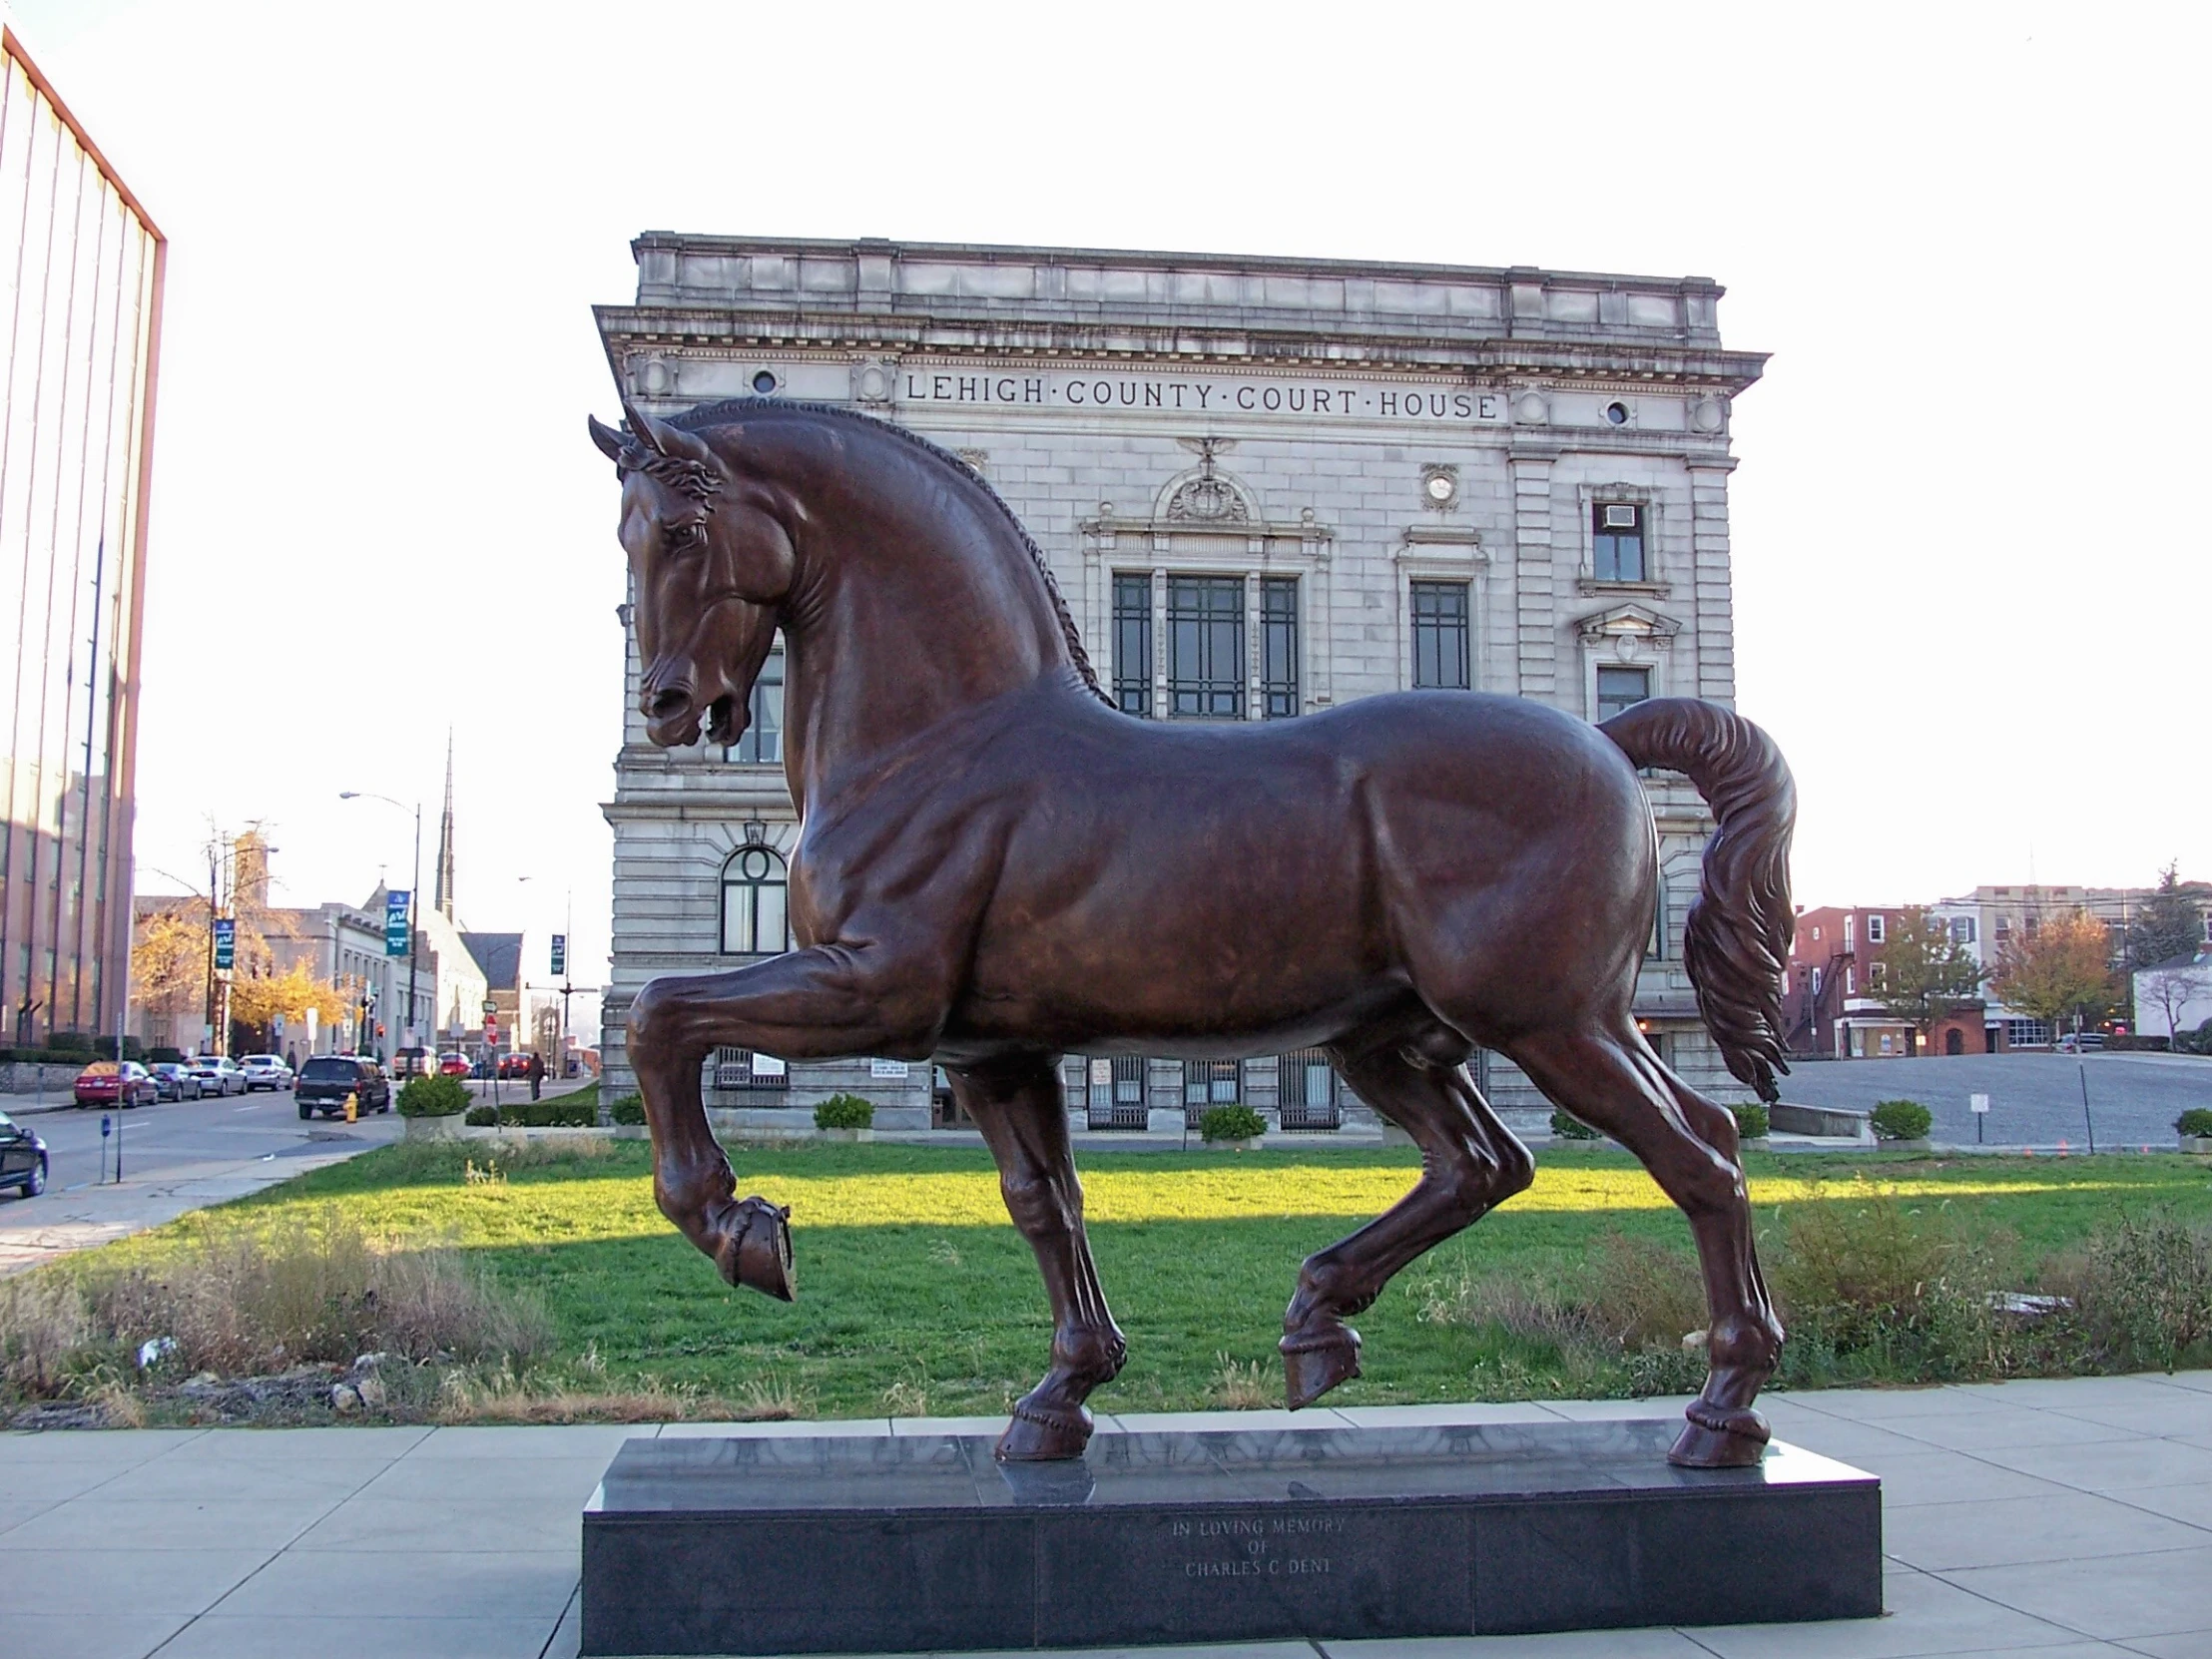 a statue of a horse is shown in front of a building